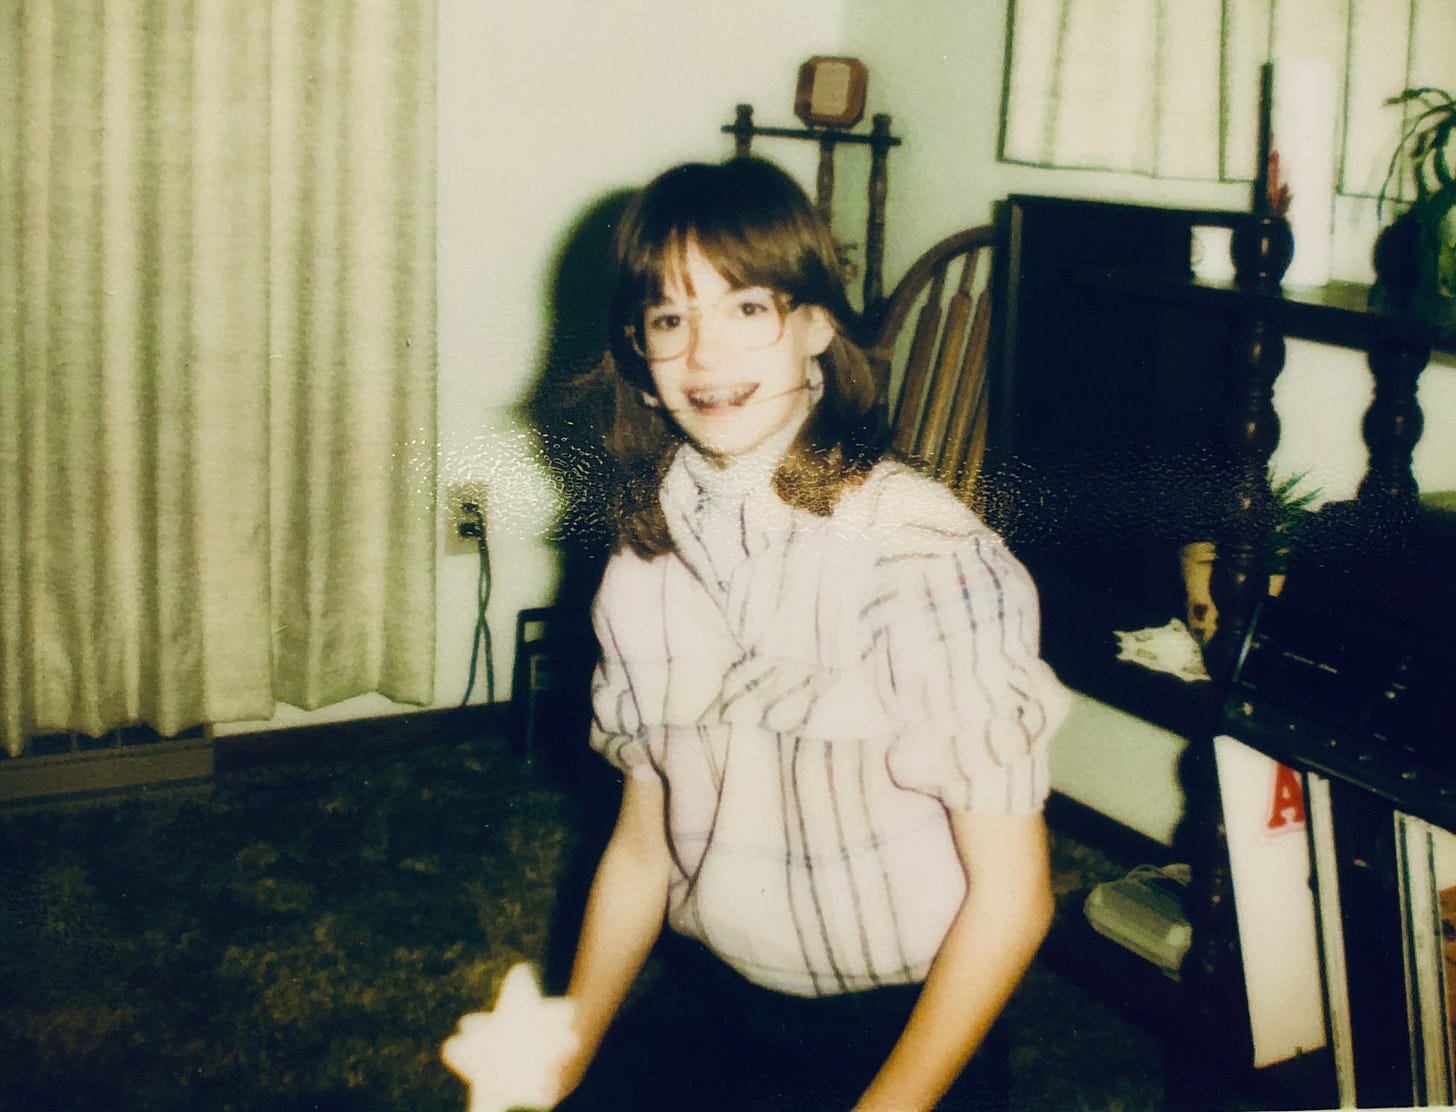 The author in big tortoiseshell glasses, braces and headgear in a pink-and-gray shirt with the collar flipped up. She sits on green shag carpet with a dark, knobby shelf behind her. If you look closely, you can see the A of the Annie album peeking out, first in line under the record player.